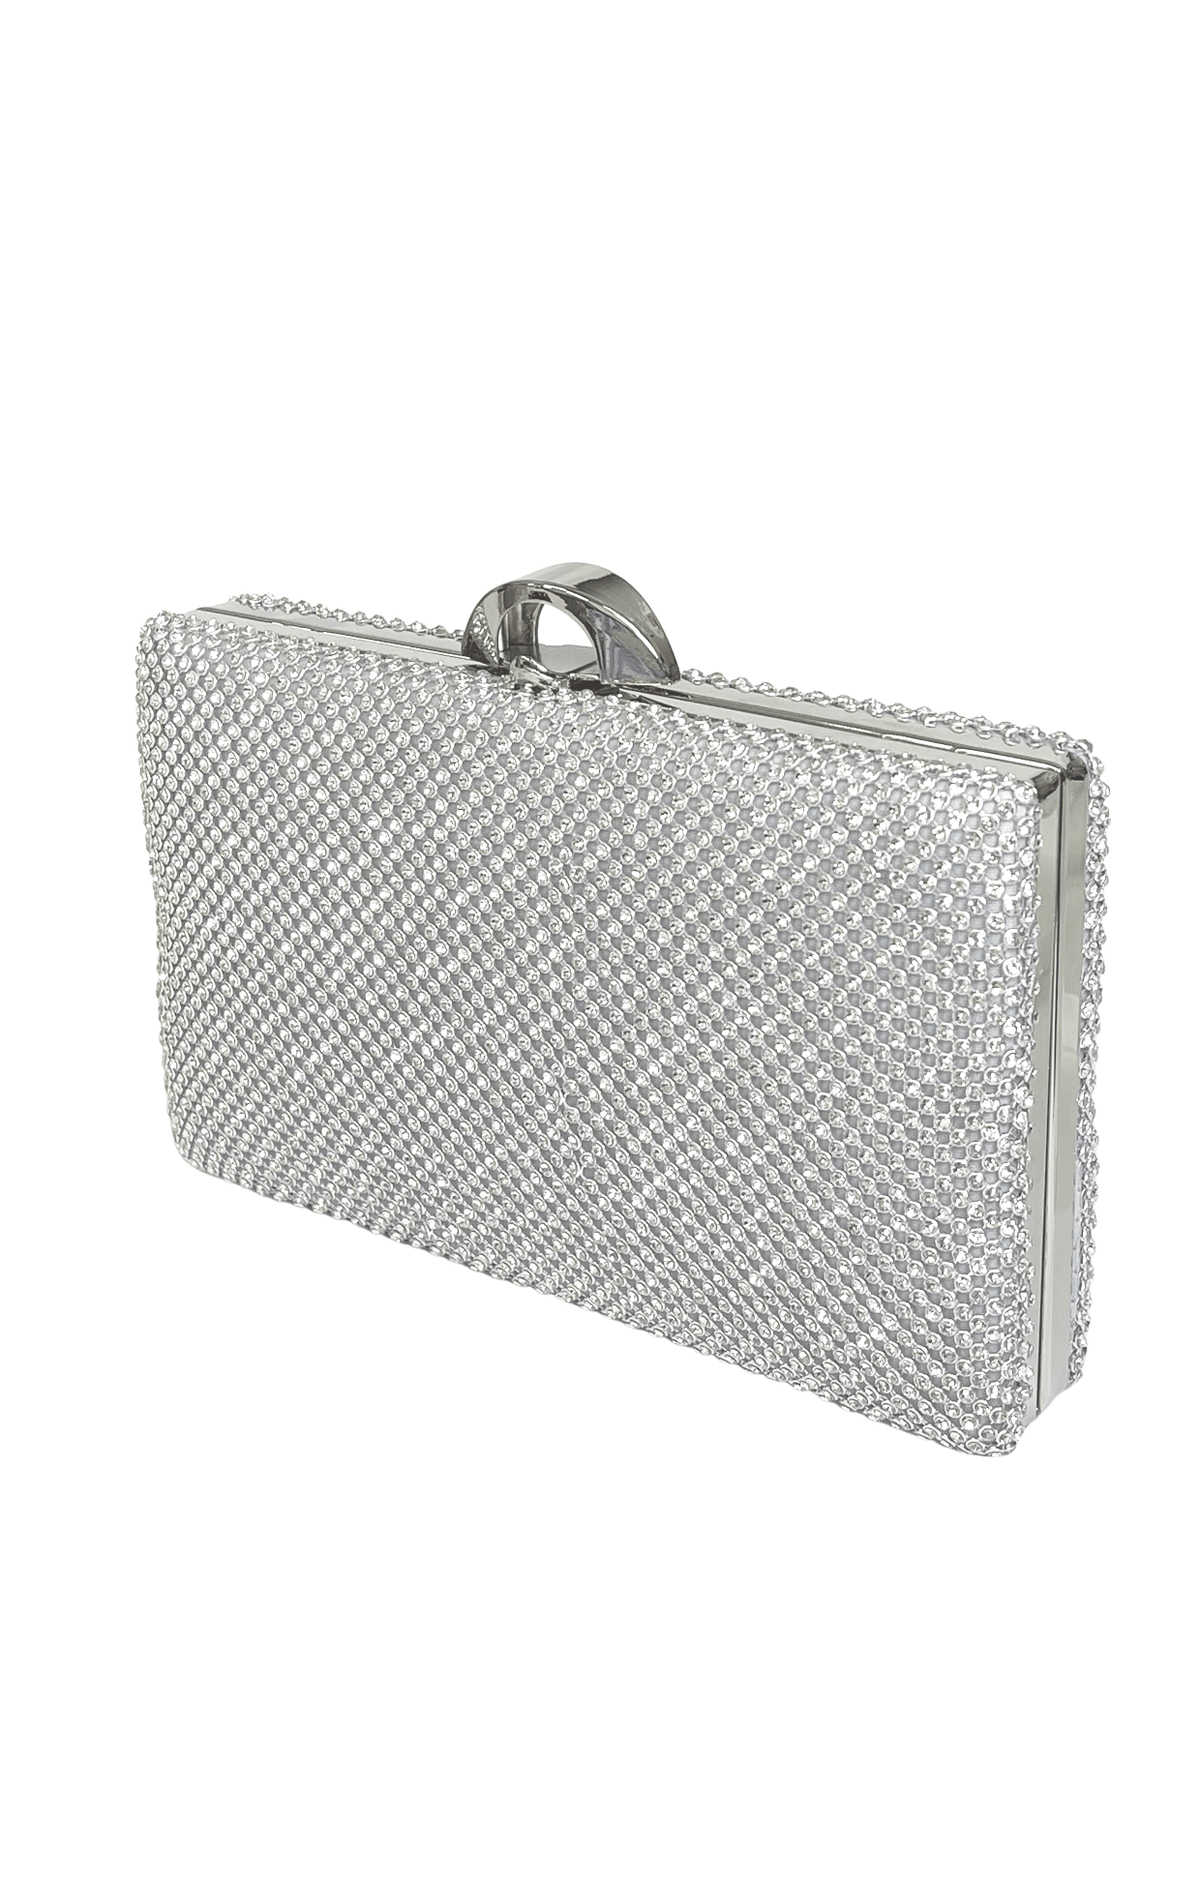 ACCESSORIES Bags Clutches One Size / Neutral MARIAH DIAMANTE STRUCTURED CLUTCH IN SILVER